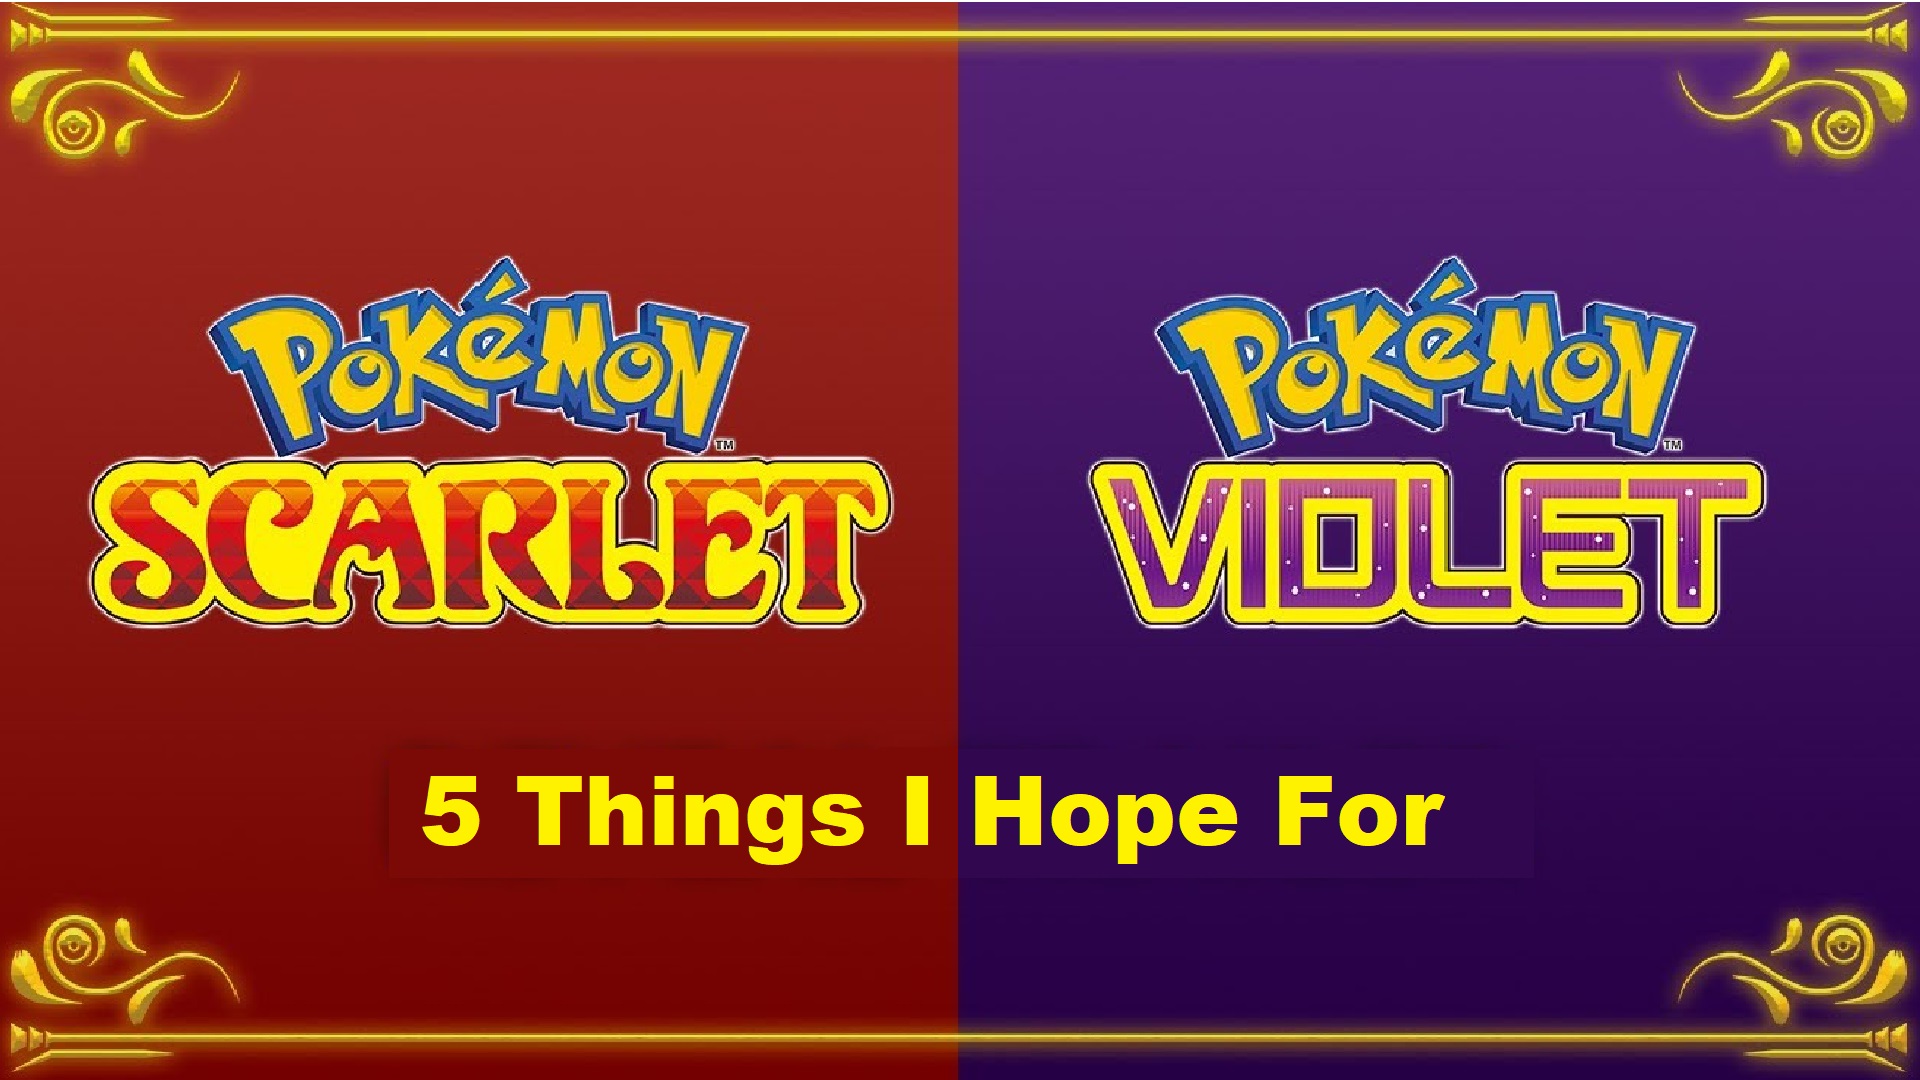 Pokemon Scarlet and Violet Wishes